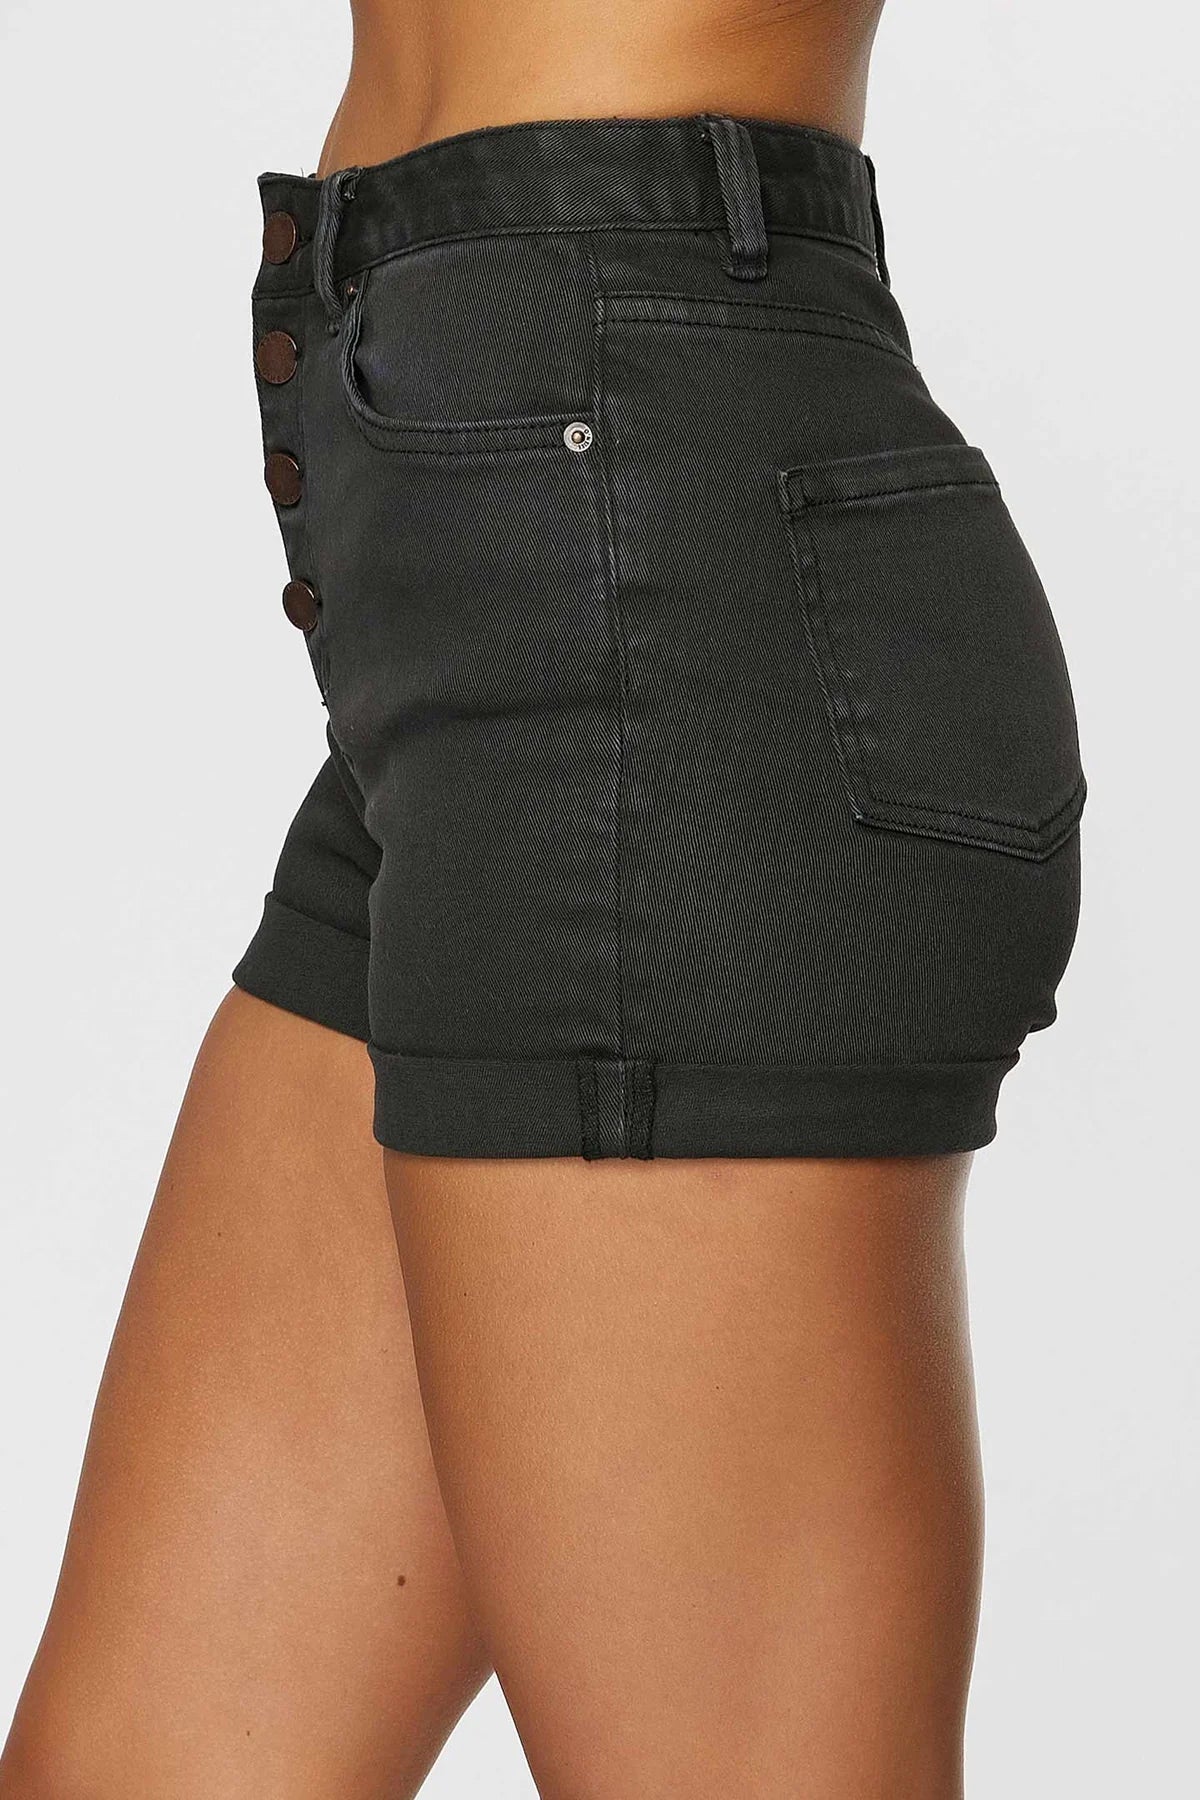 O'Neill Kelsey Denim Shorts (Non-Current)